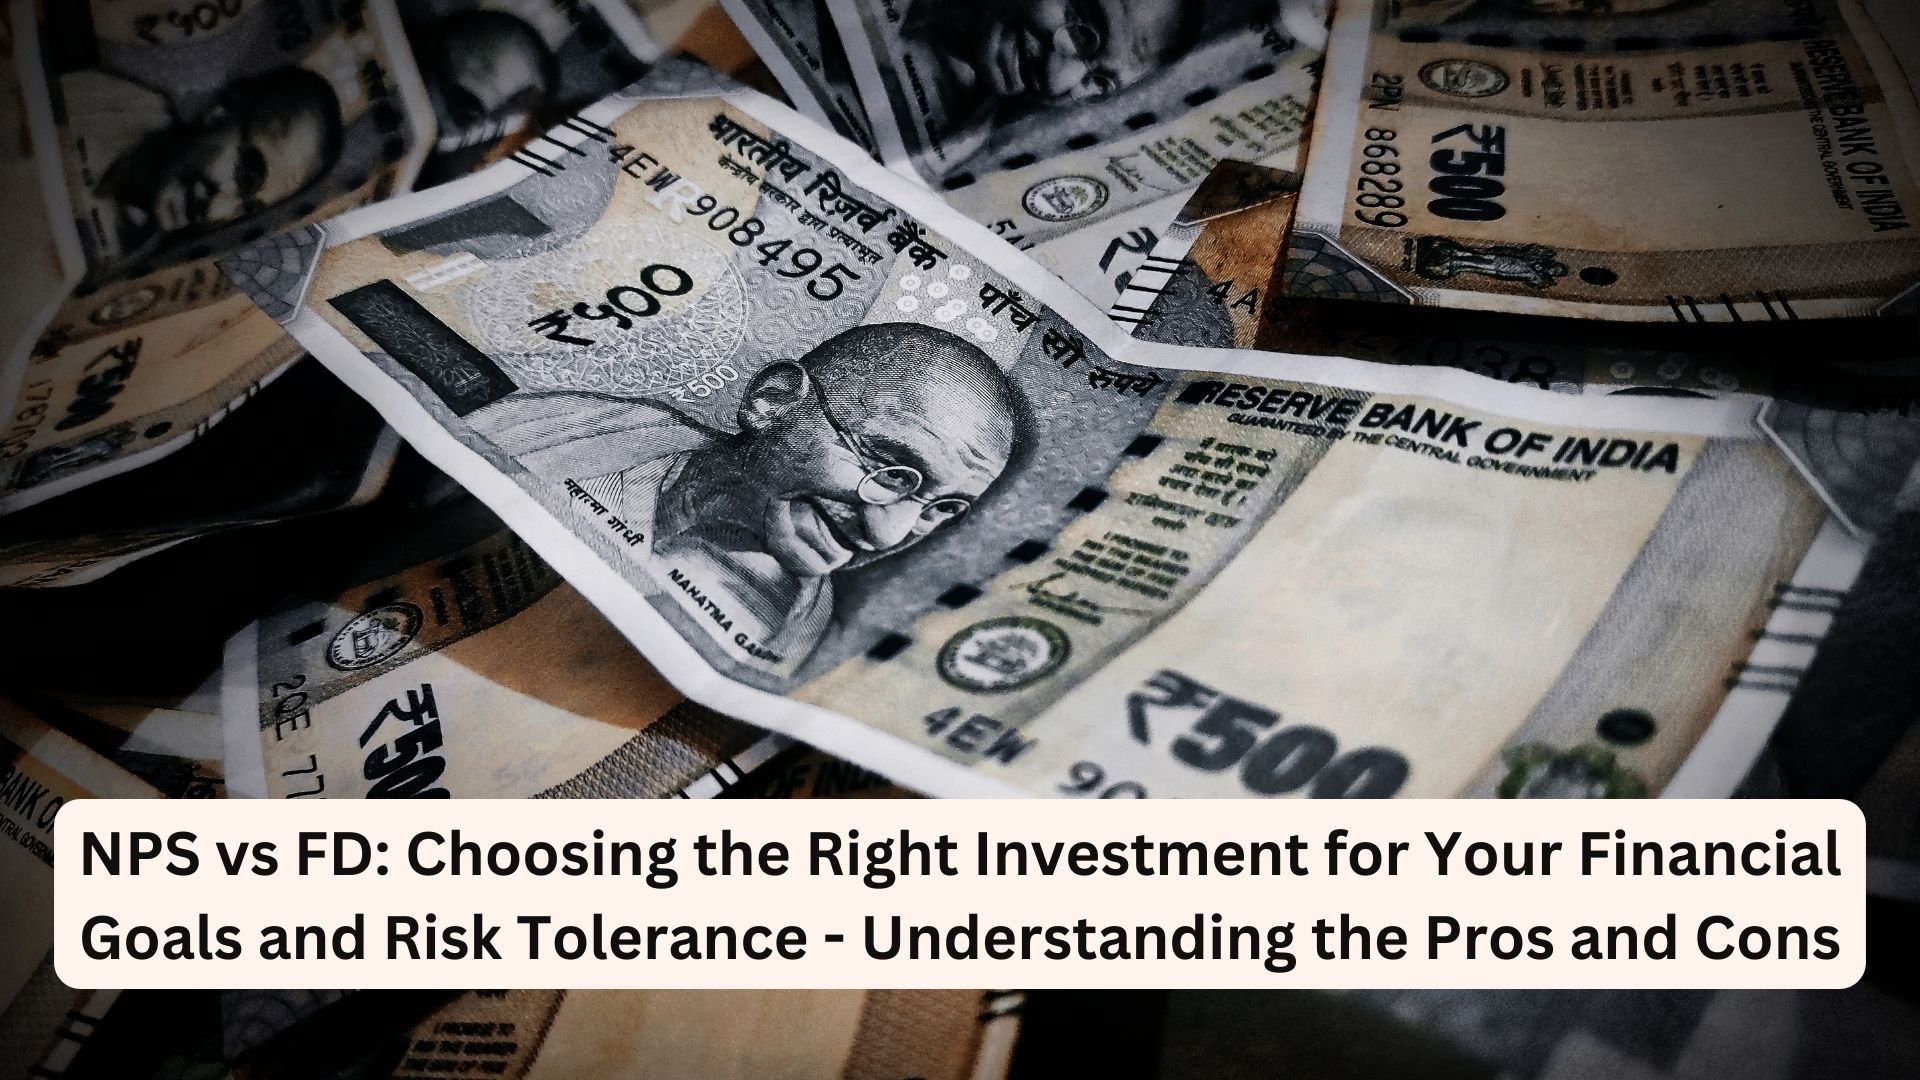 NPS vs FD: Choosing the Right Investment for Your Financial Goals and Risk Tolerance - Understanding the Pros and Cons